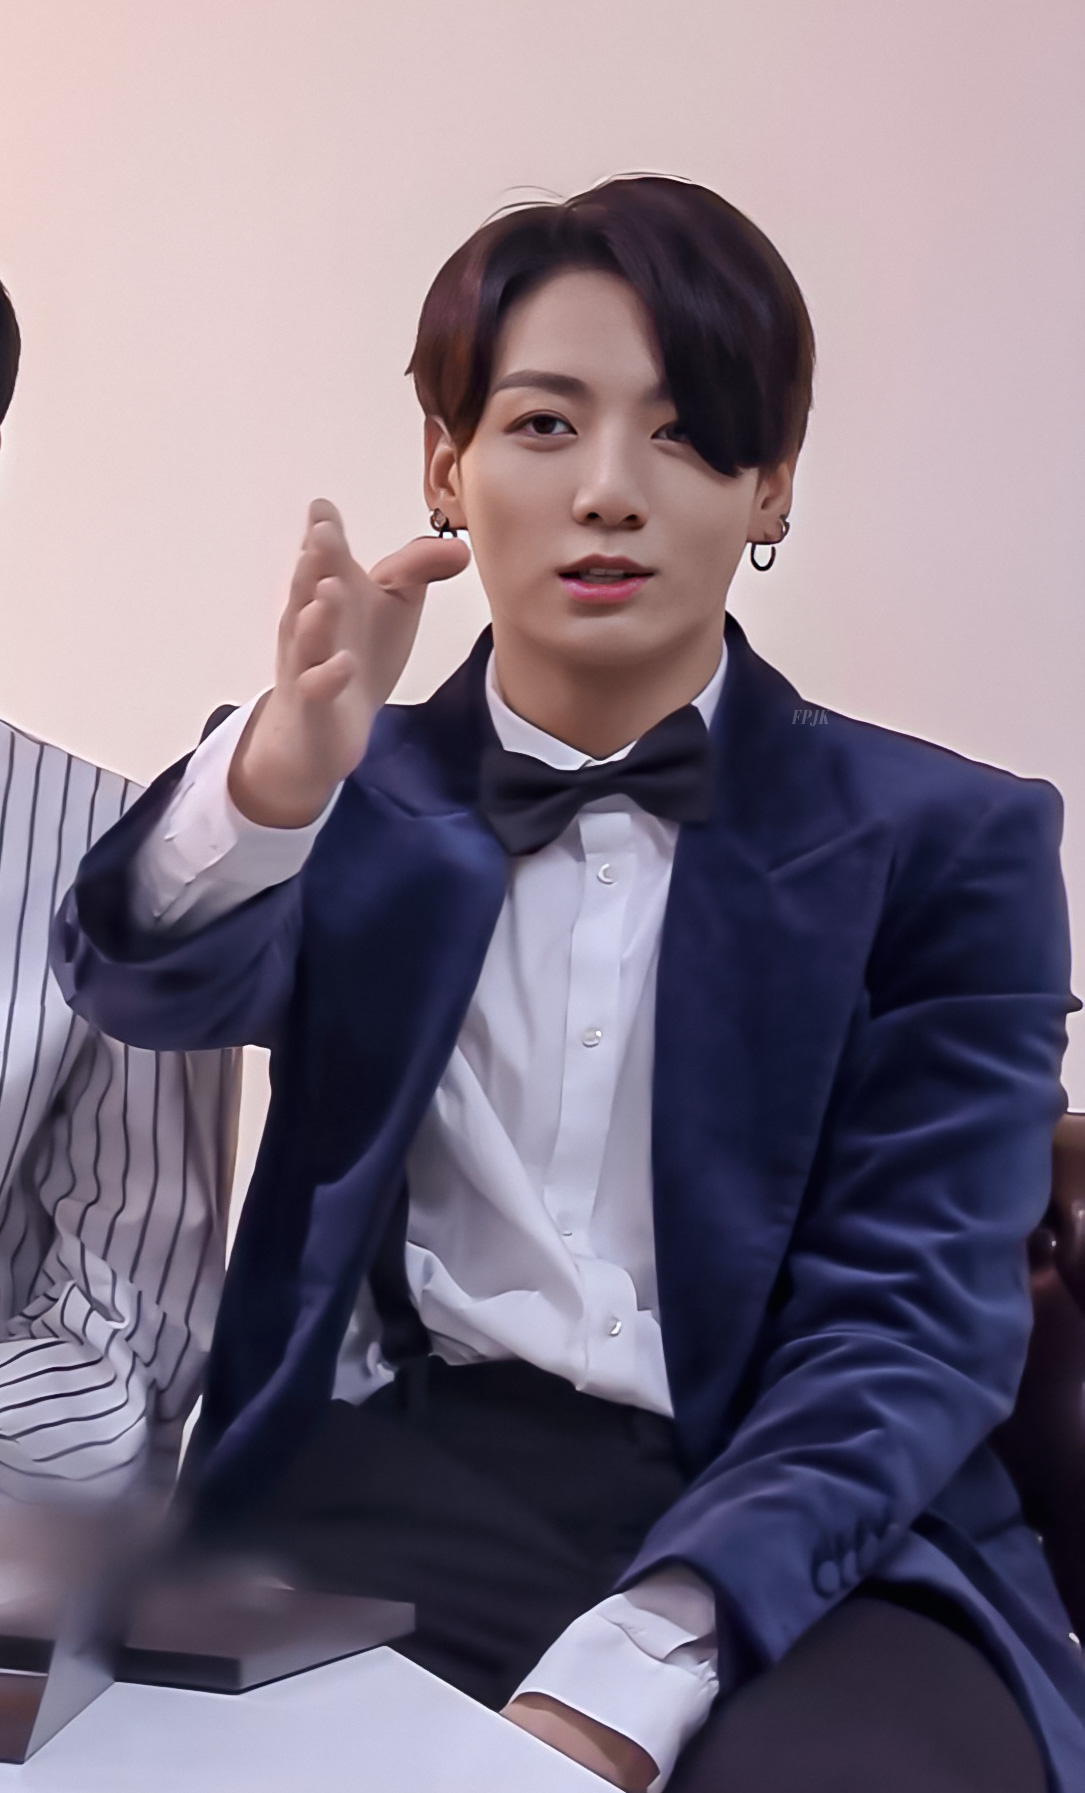 jungkook⁷ on X: jungkook in blue suit😍  / X